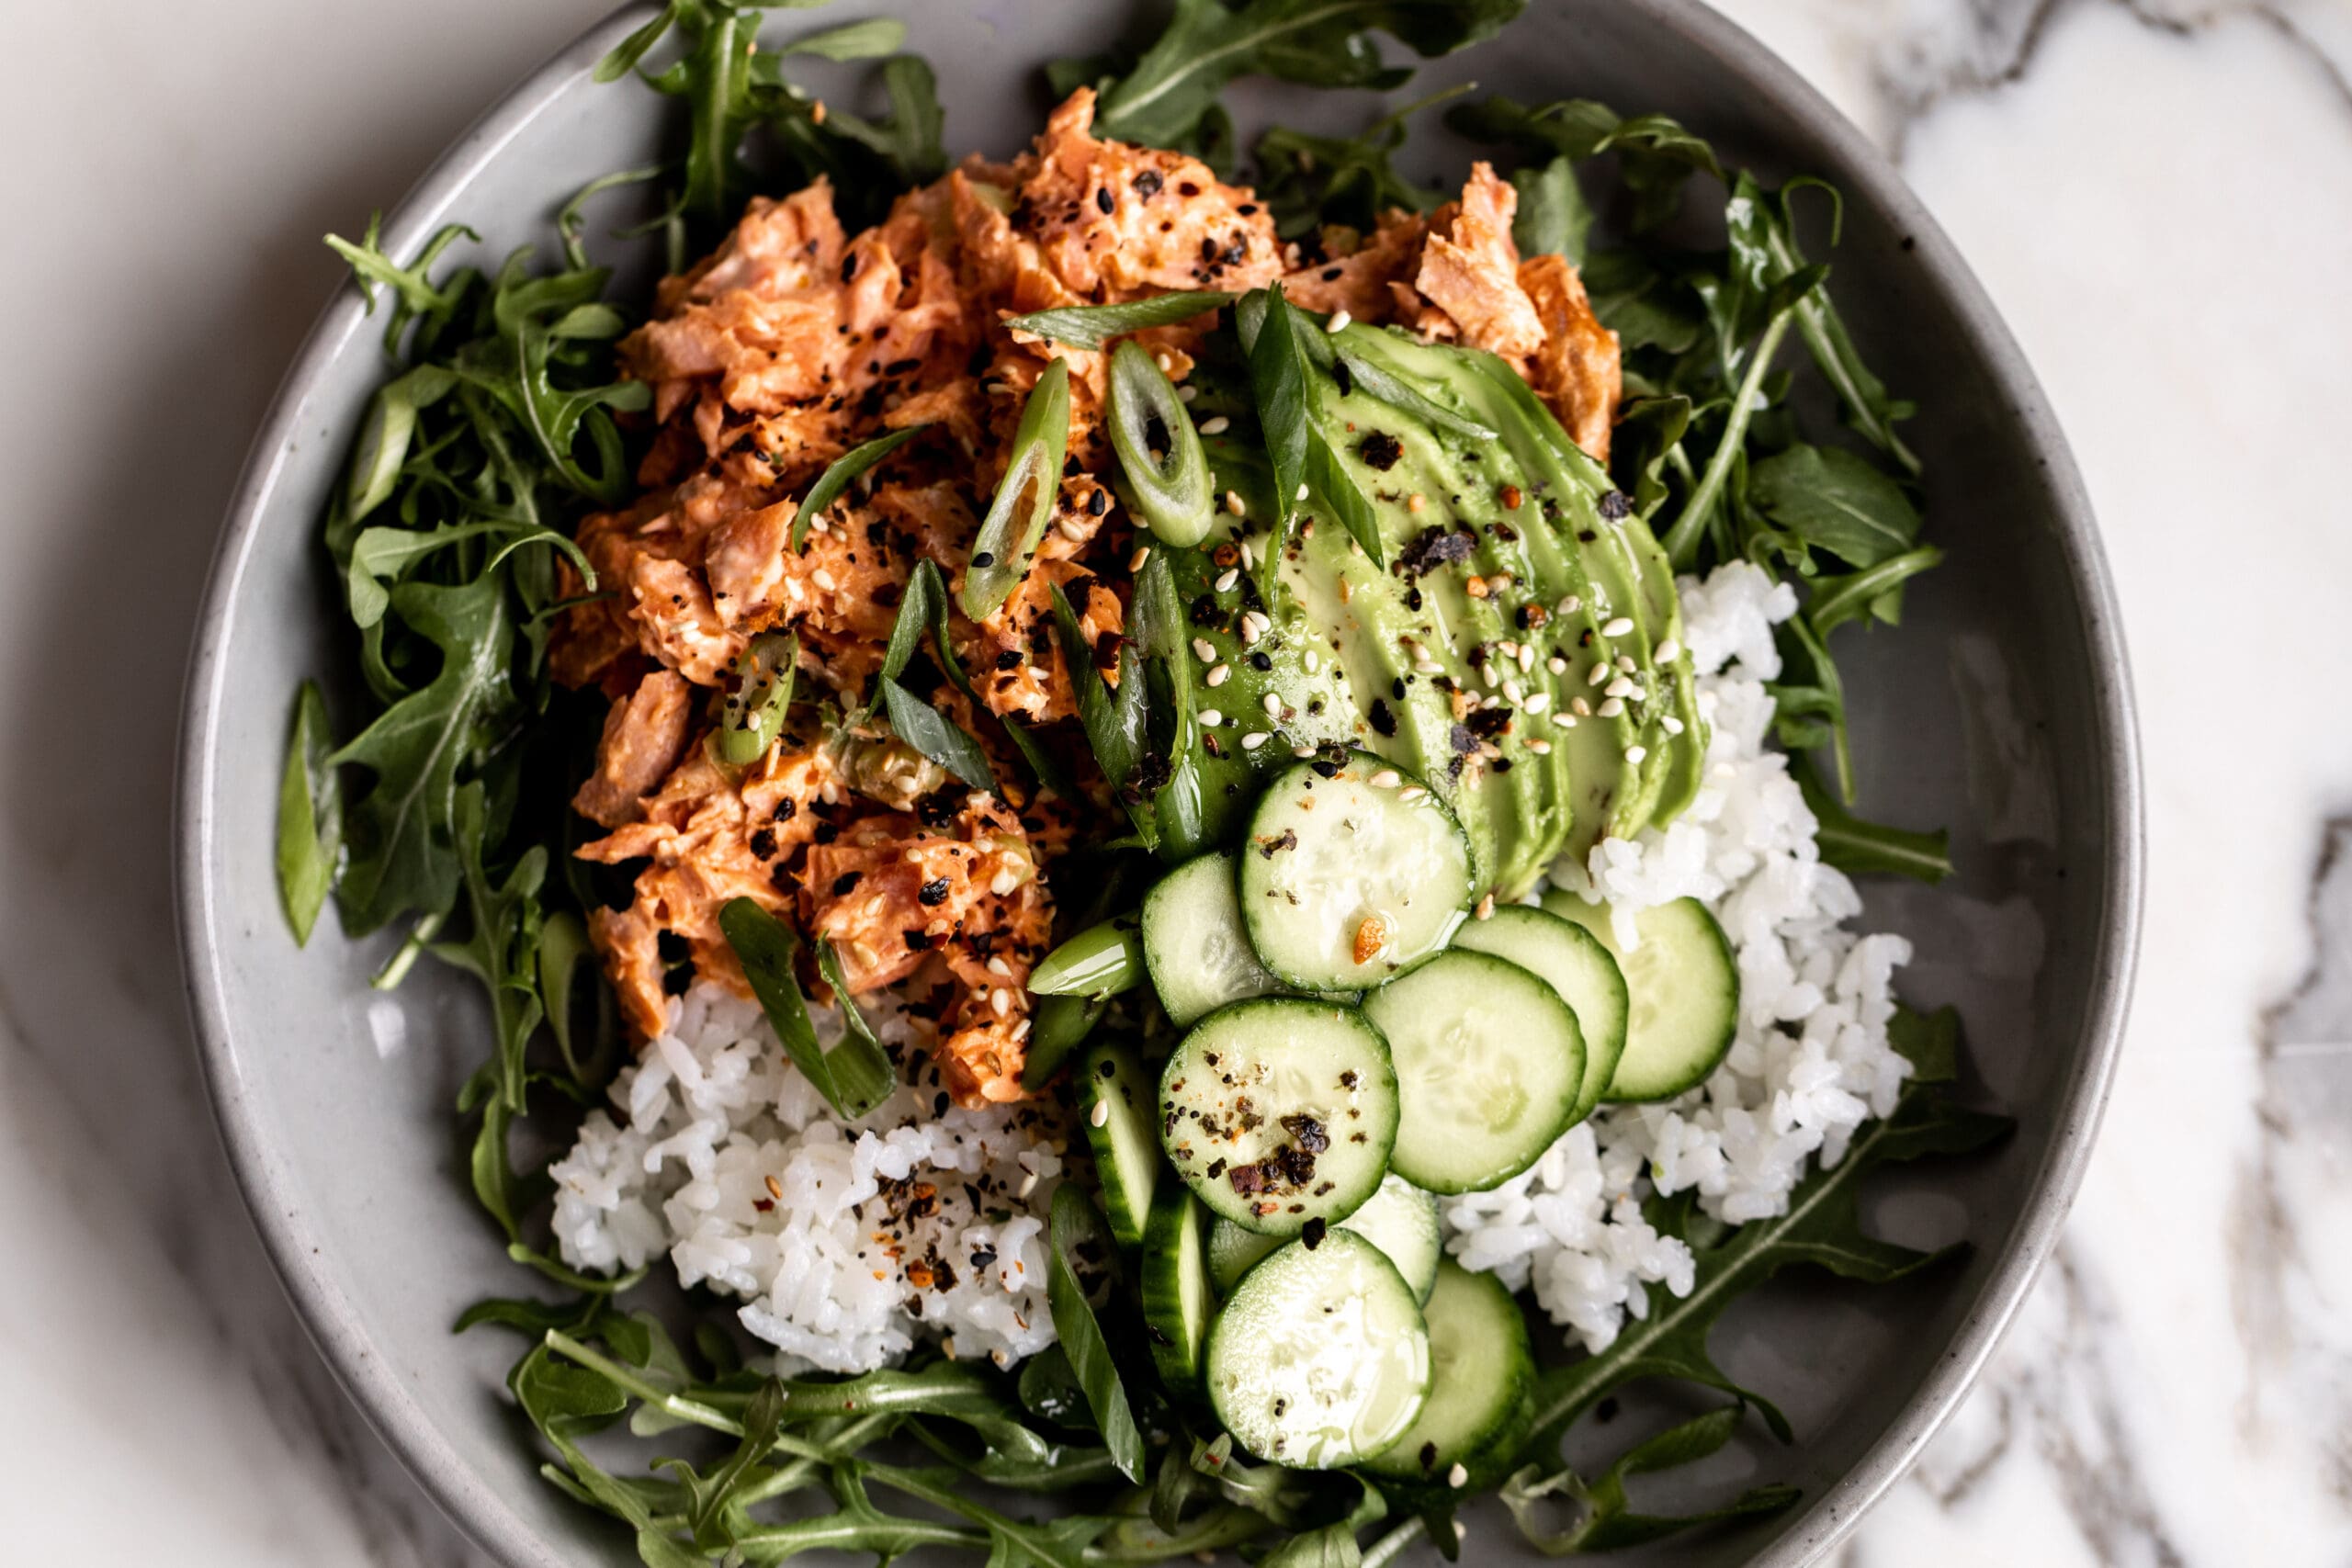 Spicy Canned Salmon Salad Rice Bowl